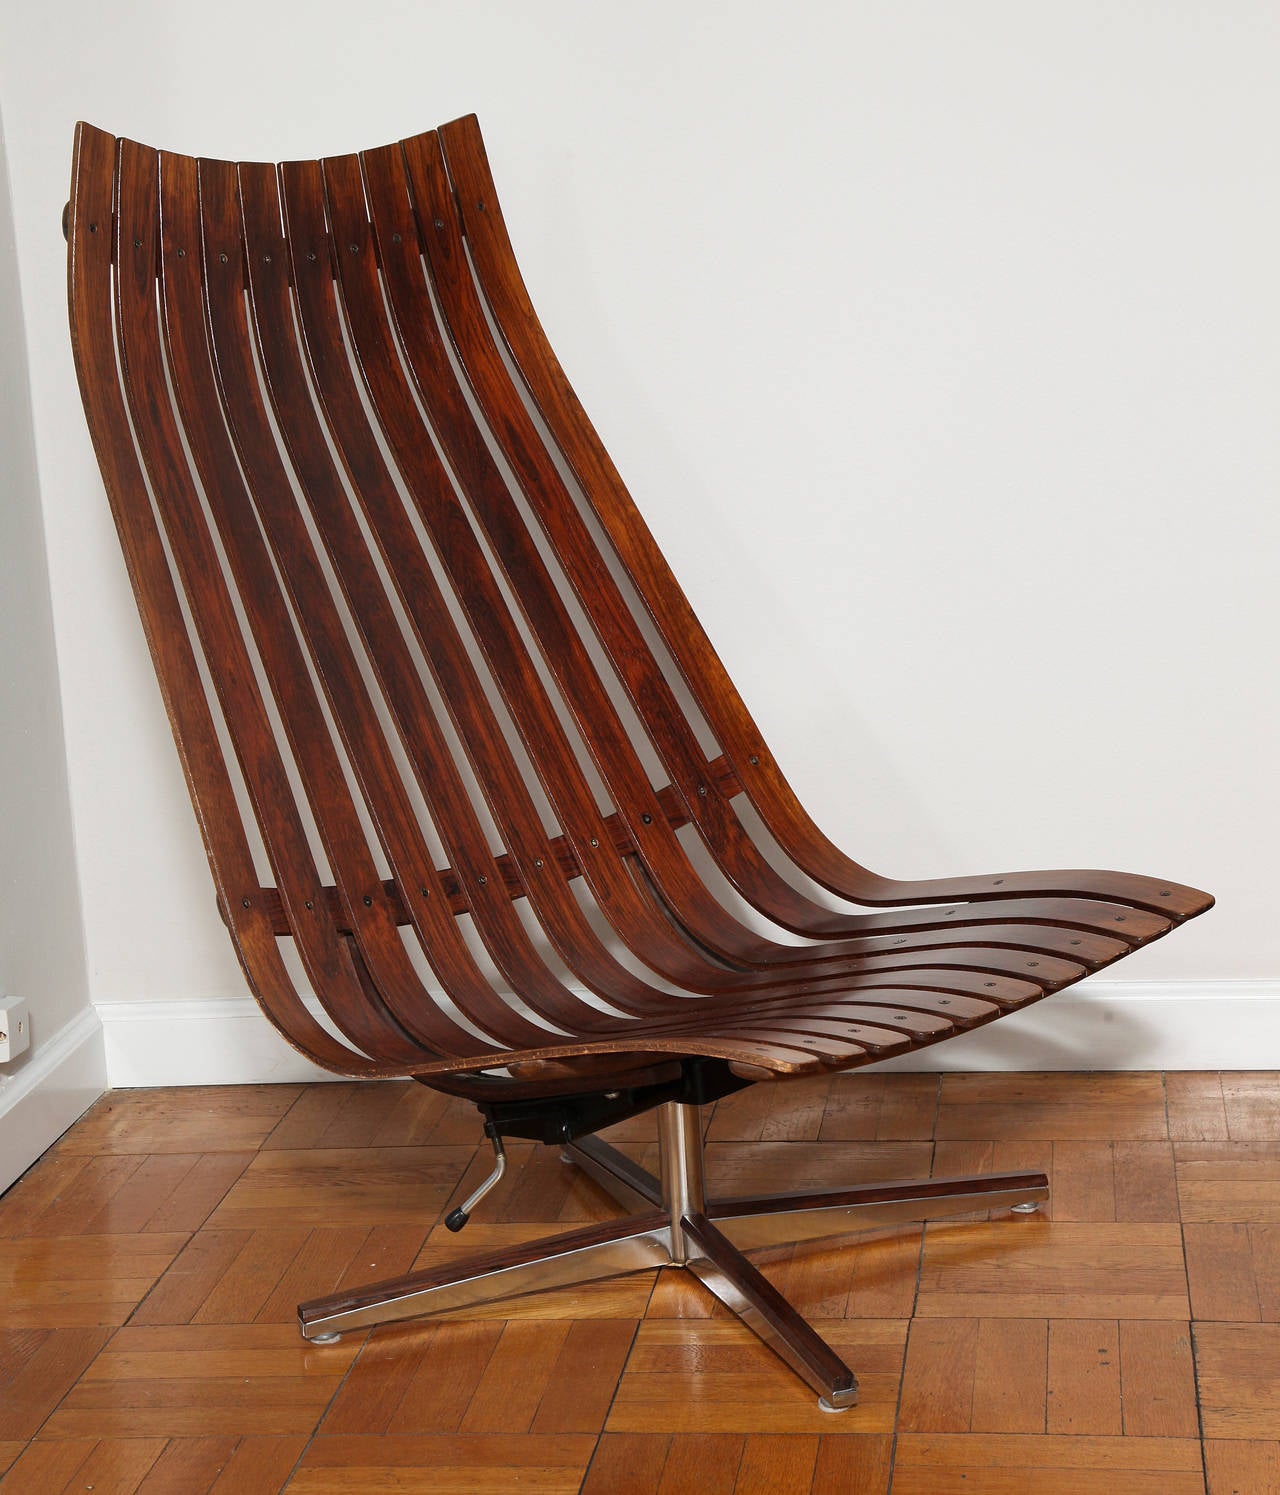 Norwegian Hans Brattrud Rosewood 'Scandia' Swivel Lounge Chair and Ottoman, Hove Mobler